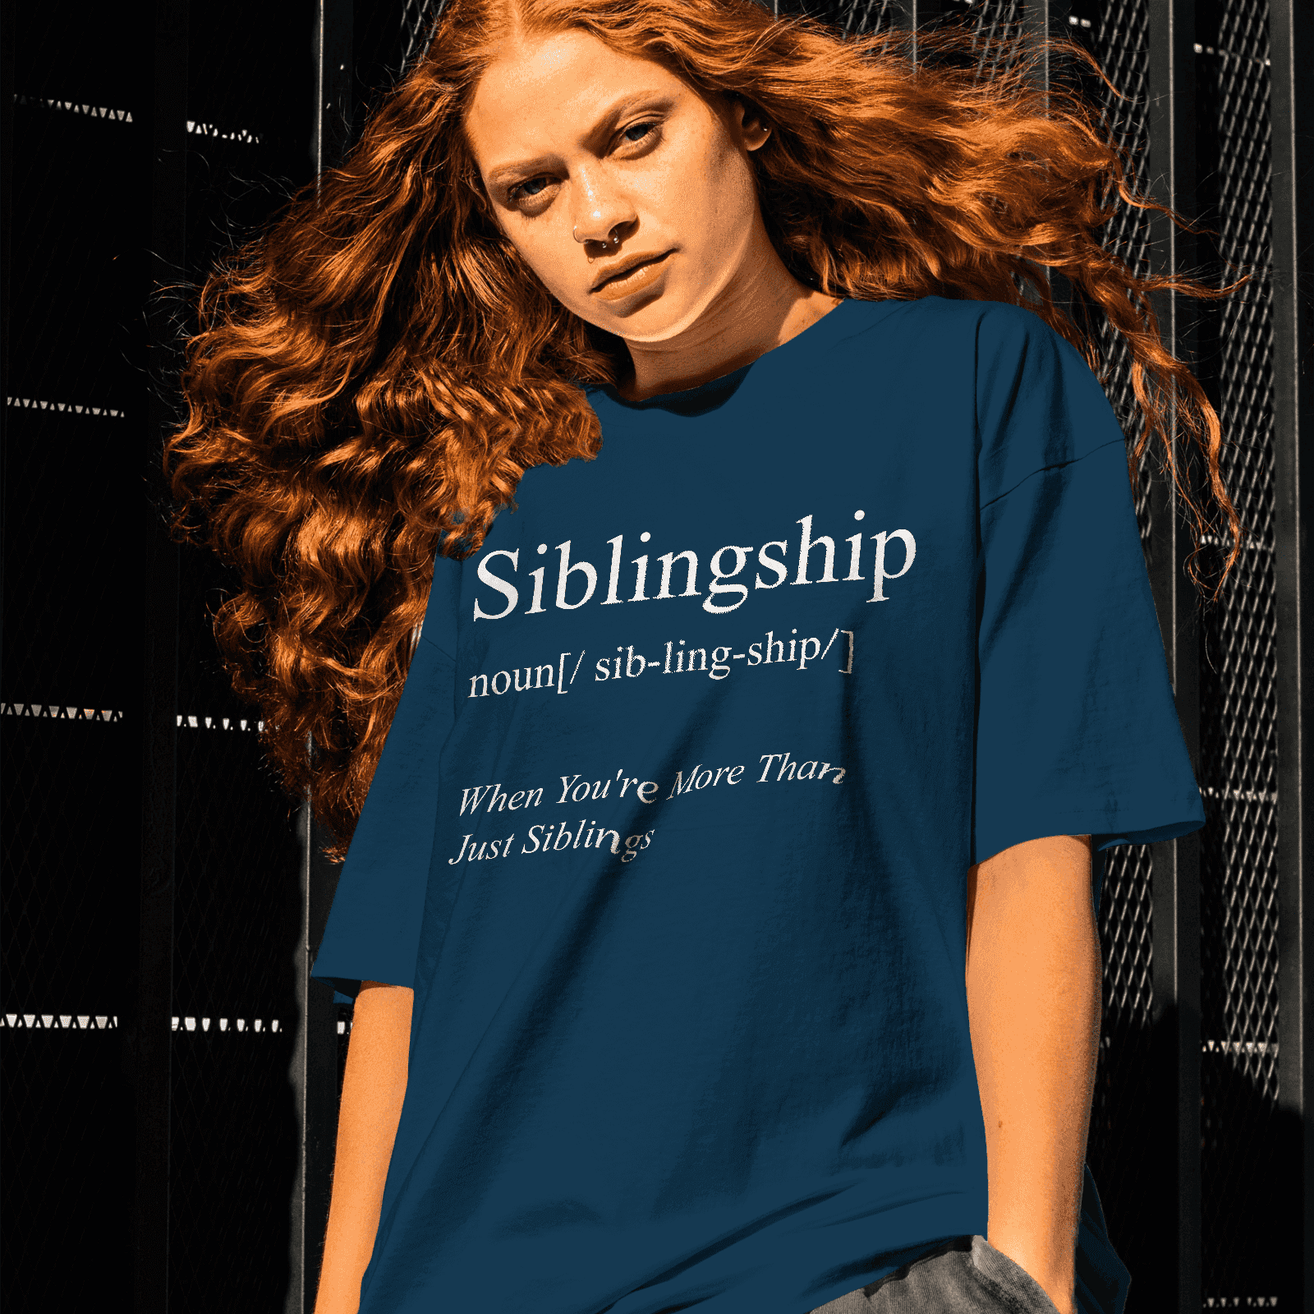 Siblingship Chronicles Women's Bonding T-Shirt - United in Laughter, Connected by Love